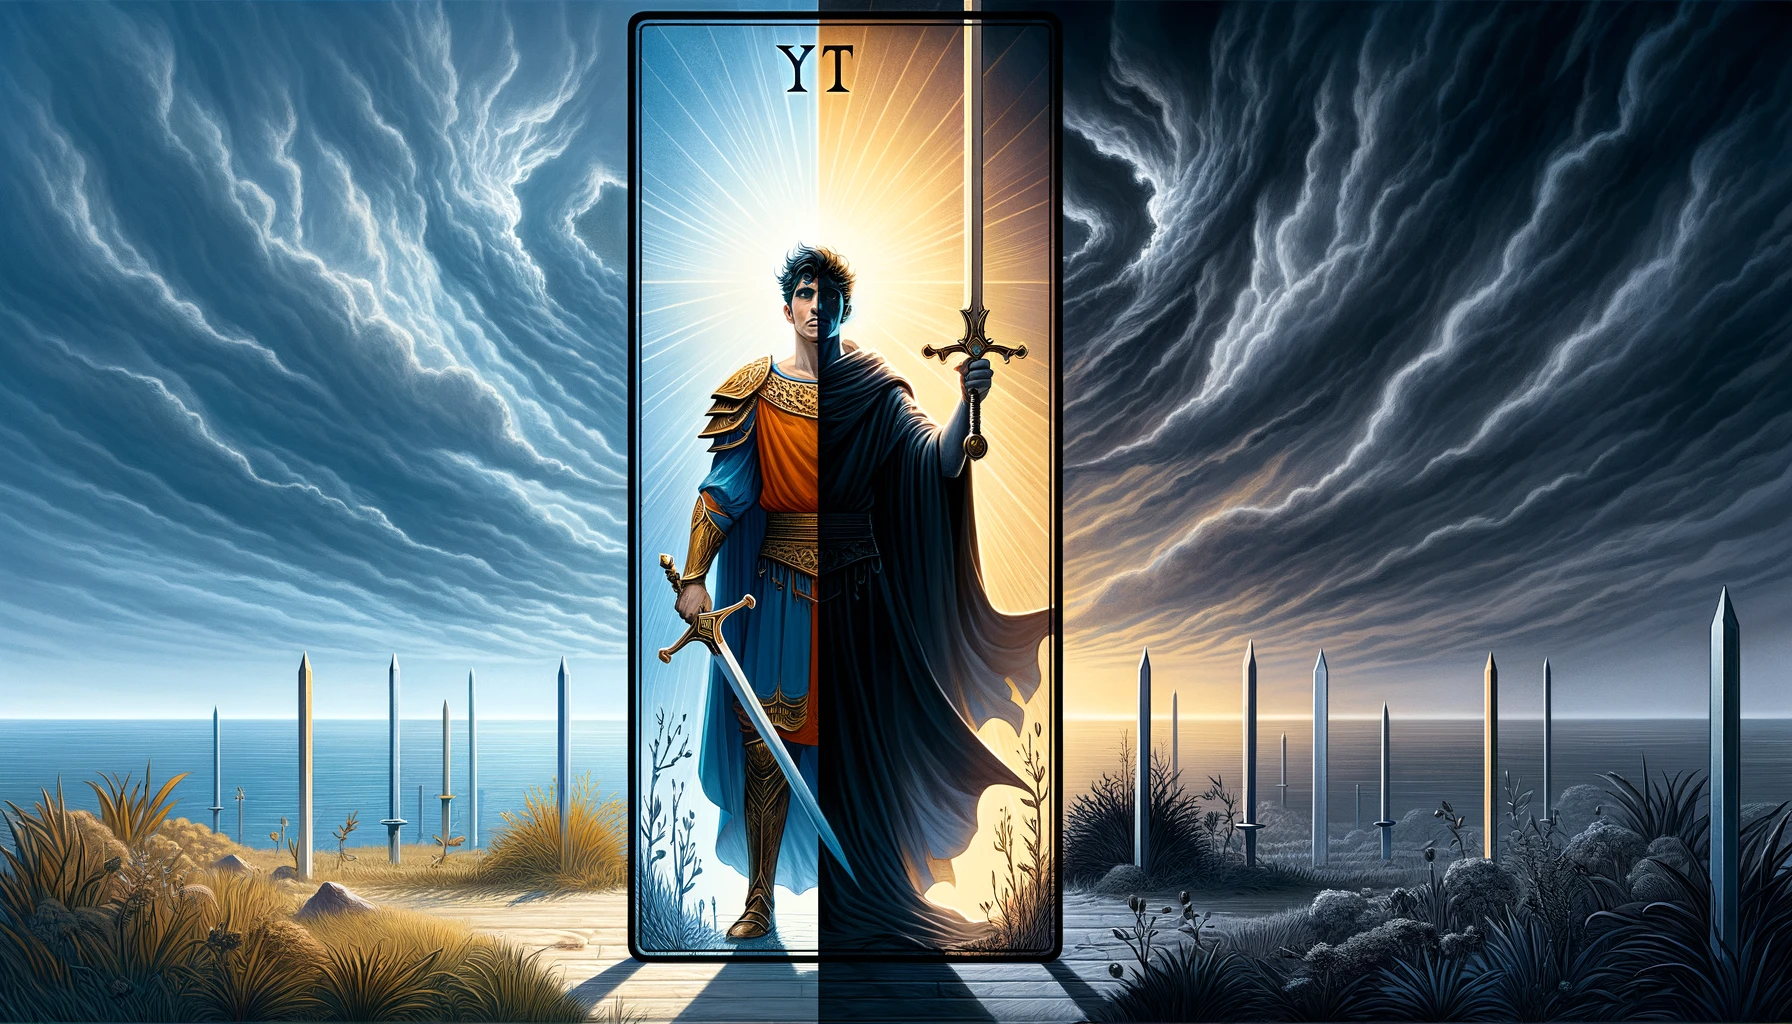 The image depicts the contrast between clarity and uncertainty in decision-making, representing the dual nature of the King of Swords card. It enriches the article by illustrating the card's role in providing insight and guidance while acknowledging the complexities of certain situations.